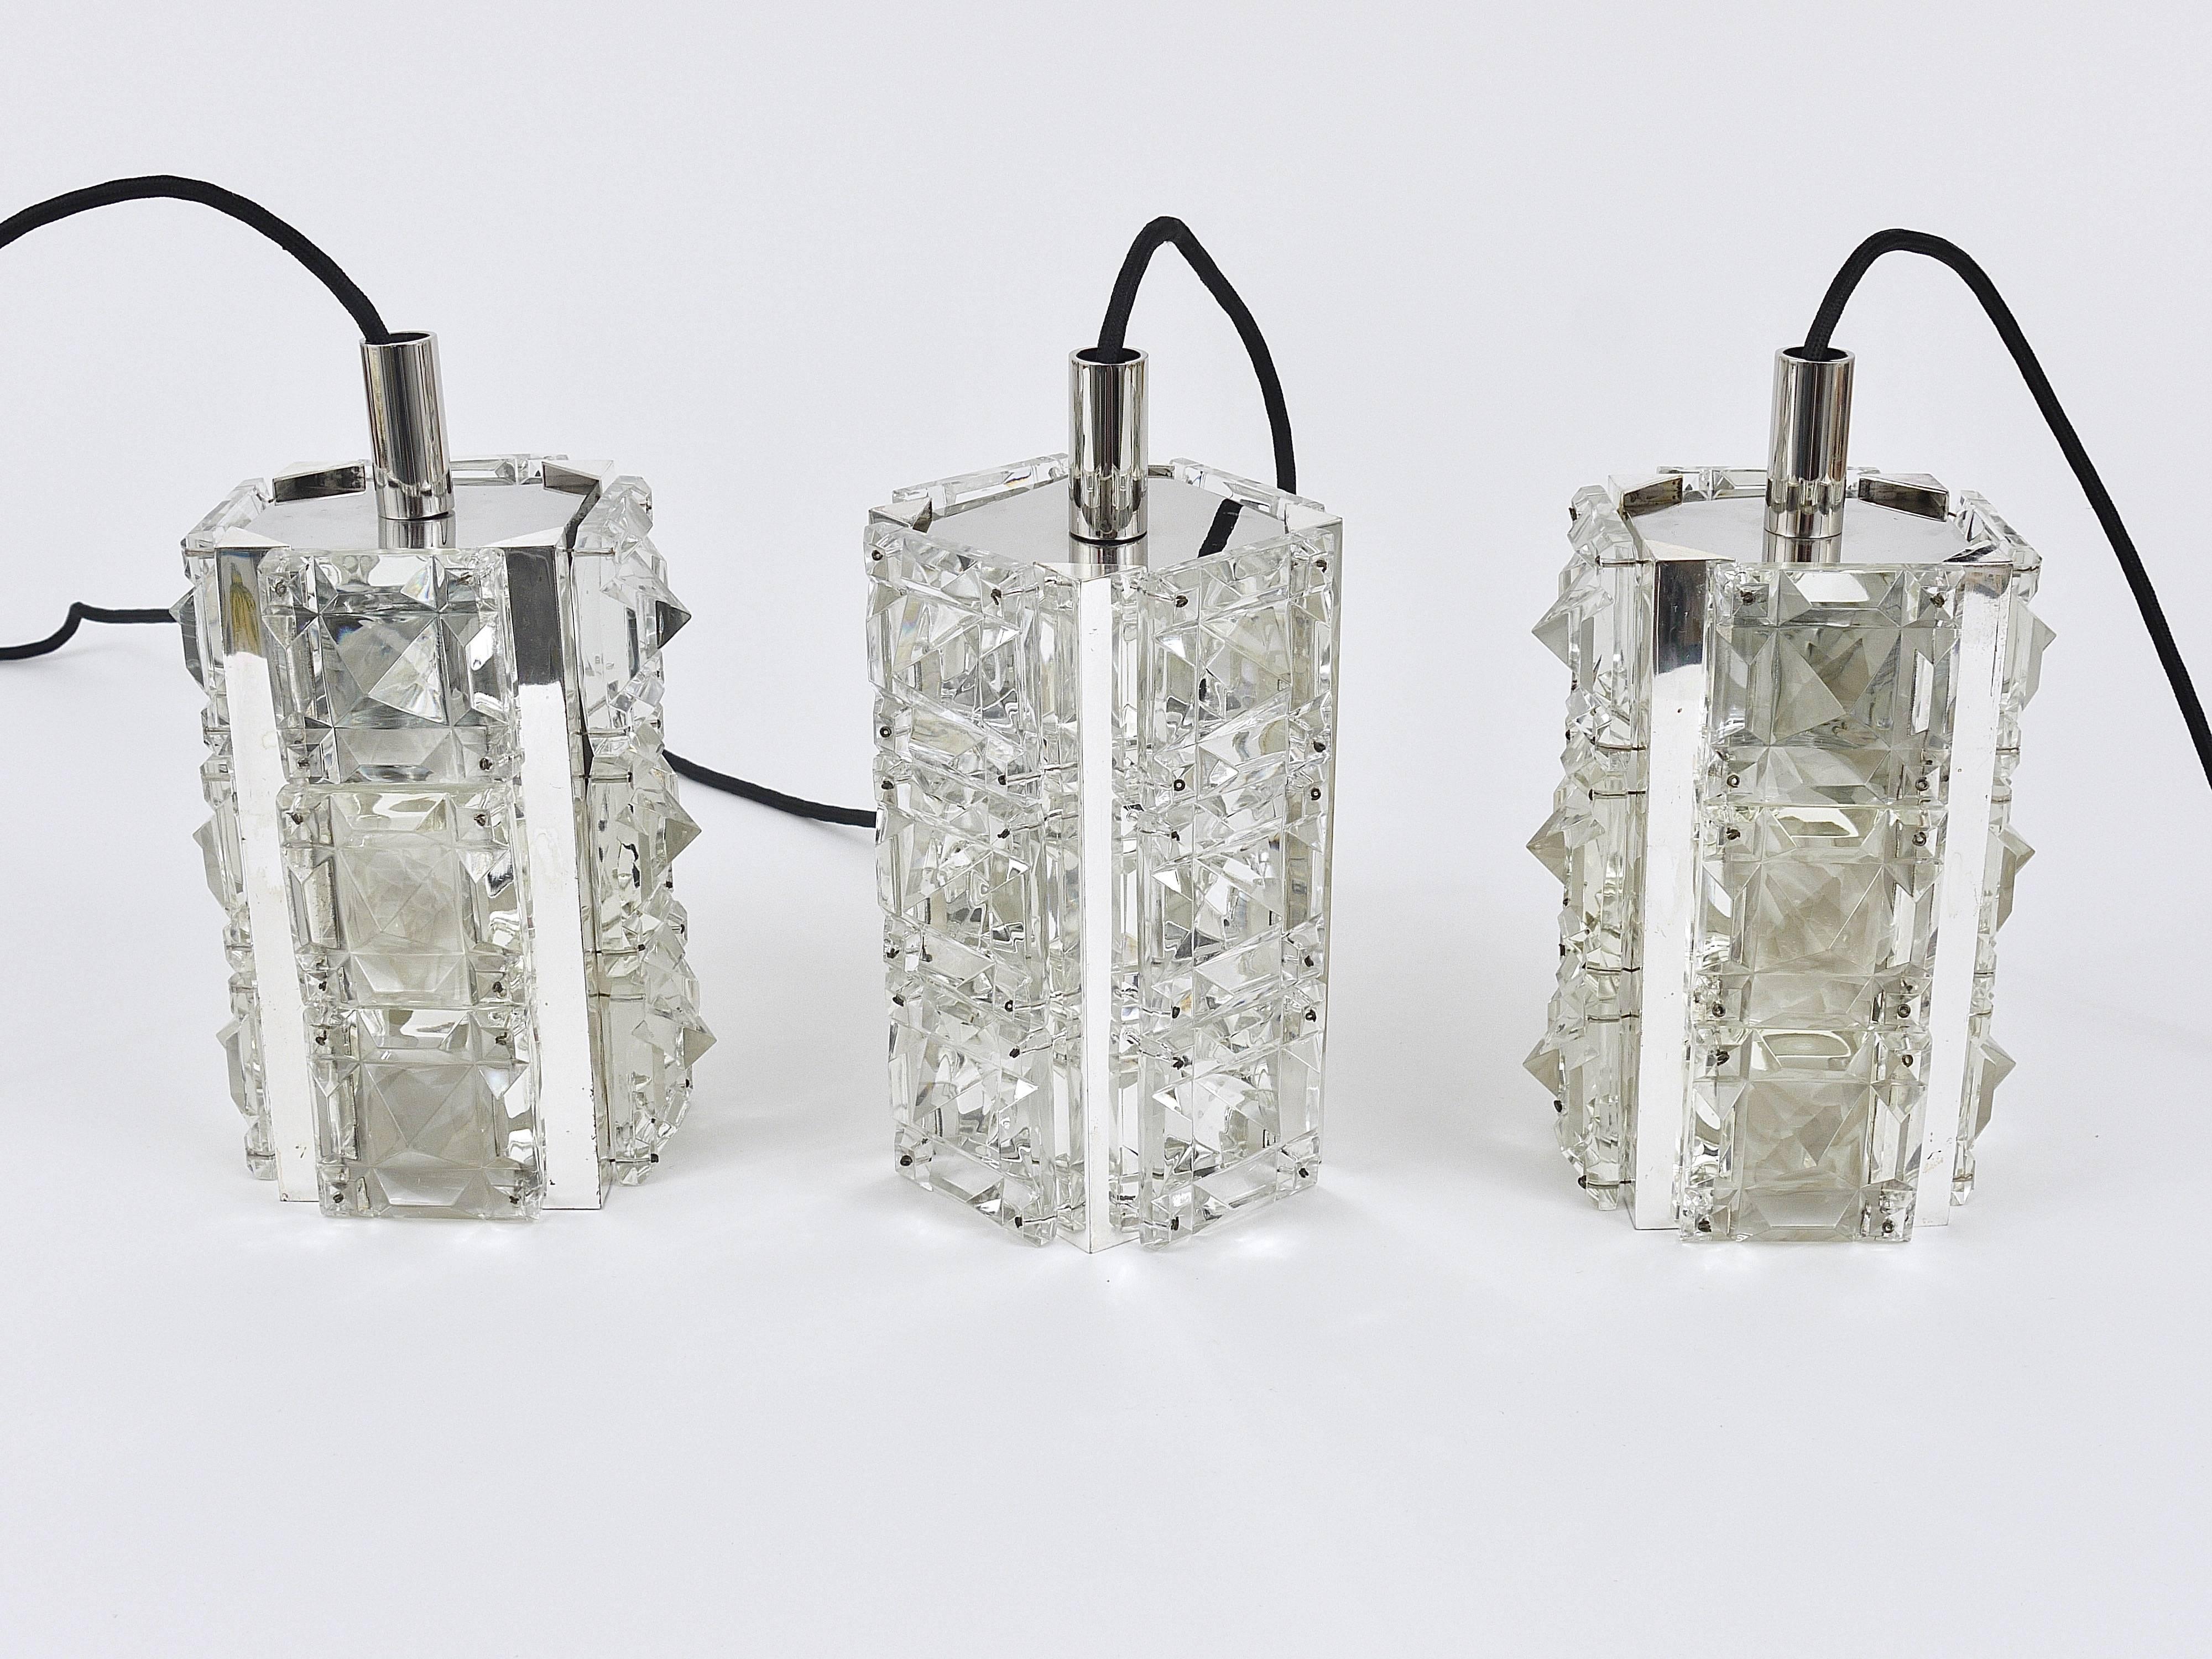 Up to Three Identical Bakalowits Faceted Crystal Pendant Lamps, Austria, 1960s For Sale 13